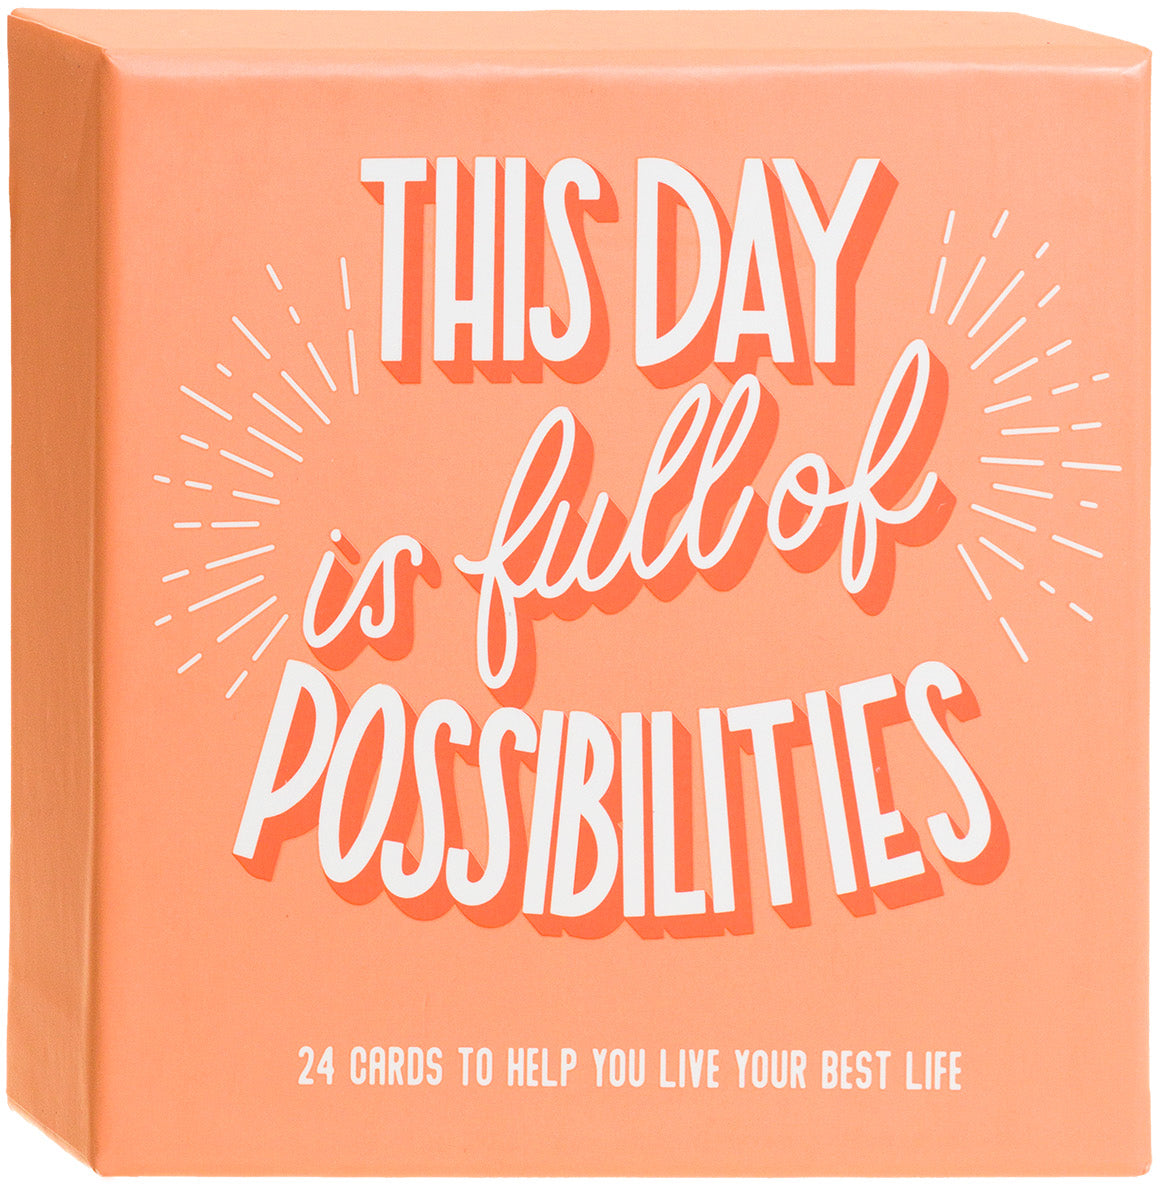 Full of Possibilities Boxed Cards